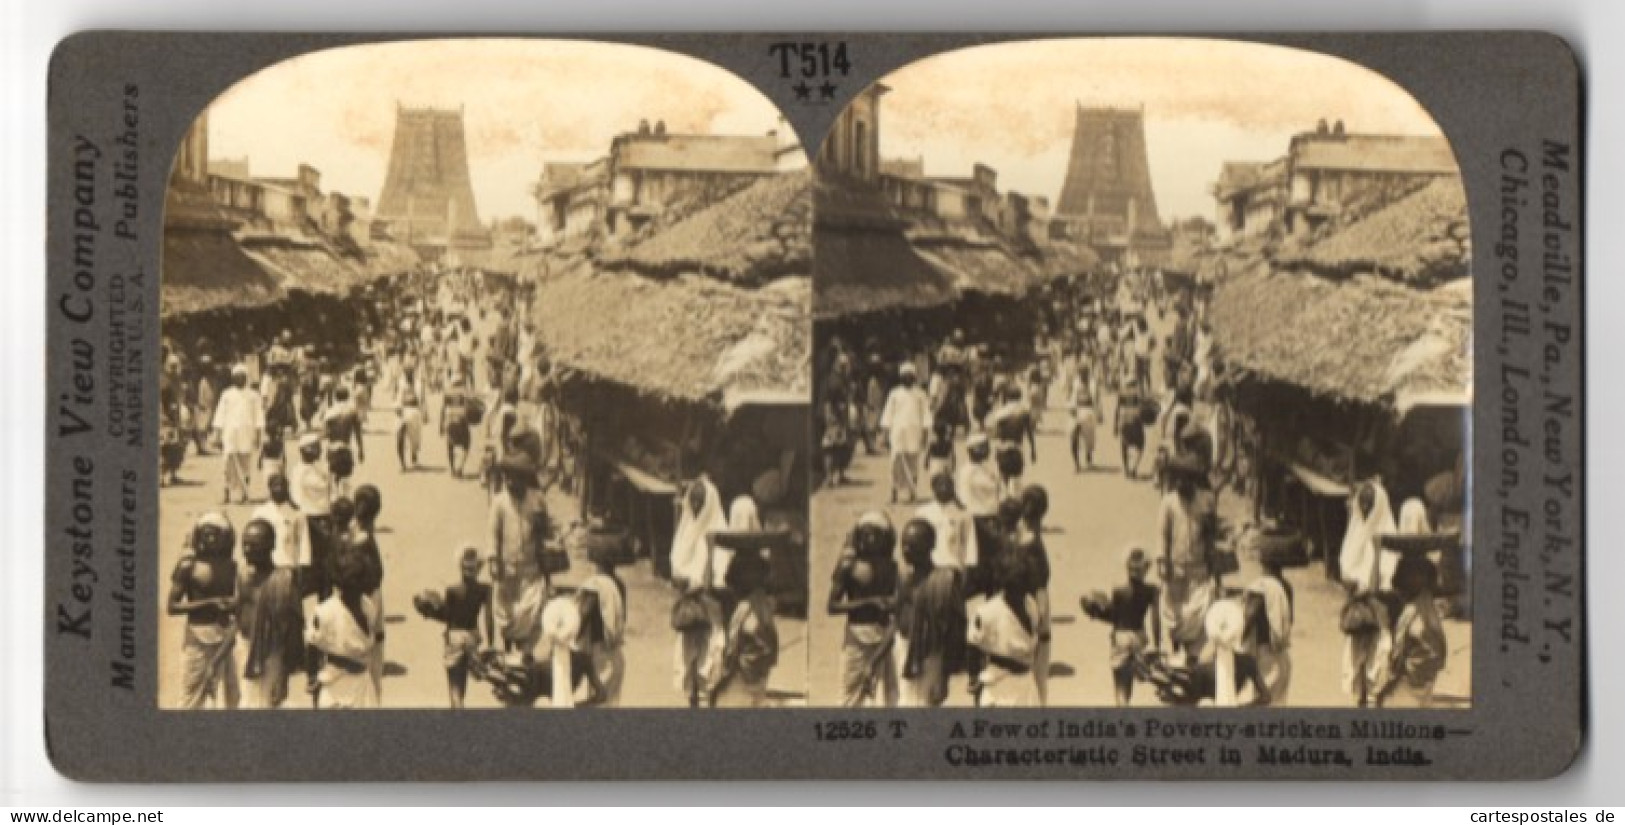 Stereo-Fotografie Keystone View Co., Meadville, Ansicht Madura, A Characteristic Street With Nativ People  - Photos Stéréoscopiques